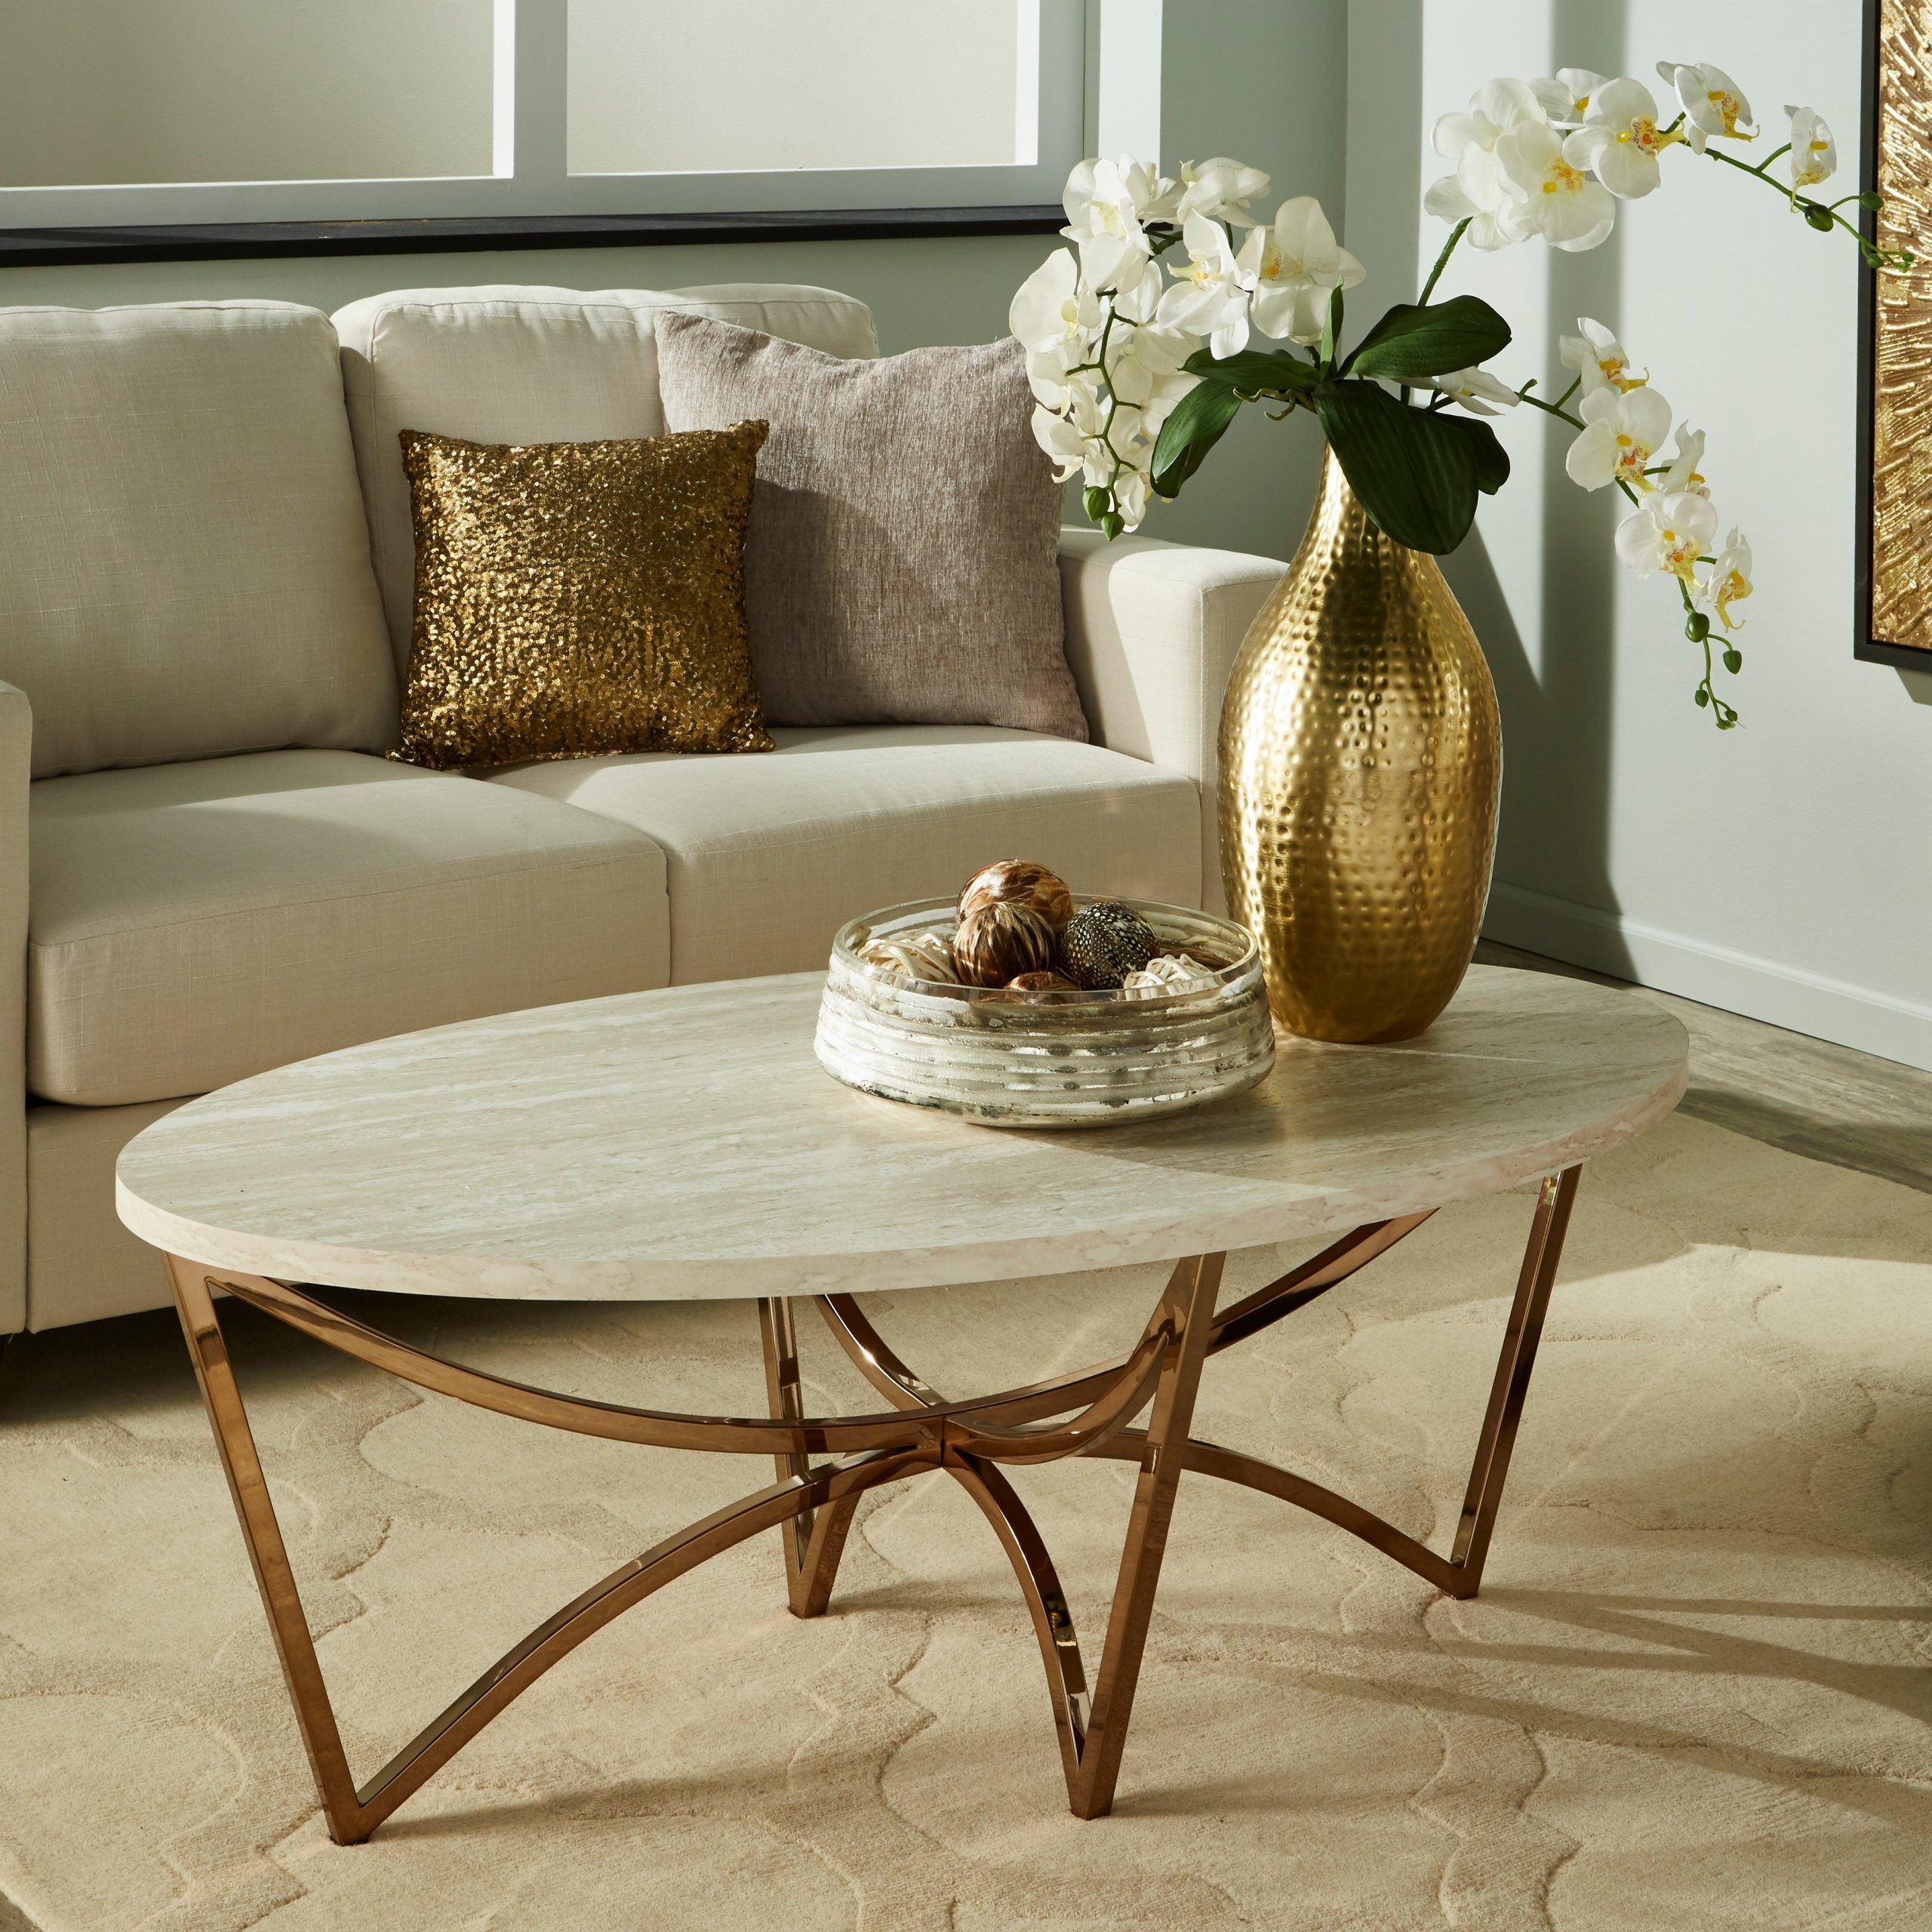 2018 Glass And Gold Coffee Tables With Gottlieb Round Glass Gold Coffee Table / Vittoria (View 5 of 20)